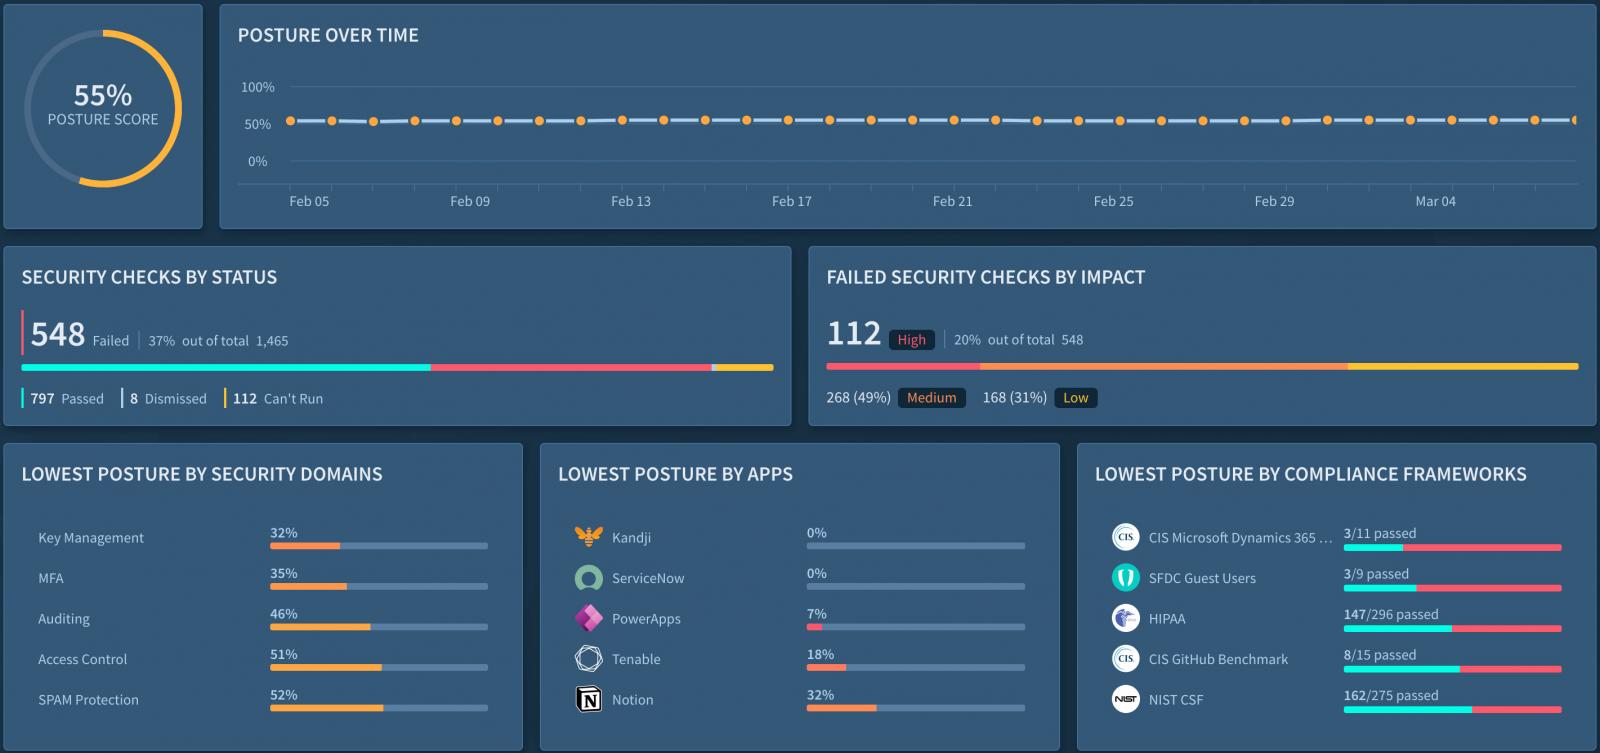  The Adaptive Shield platform provides a dashboard view of SaaS security posture